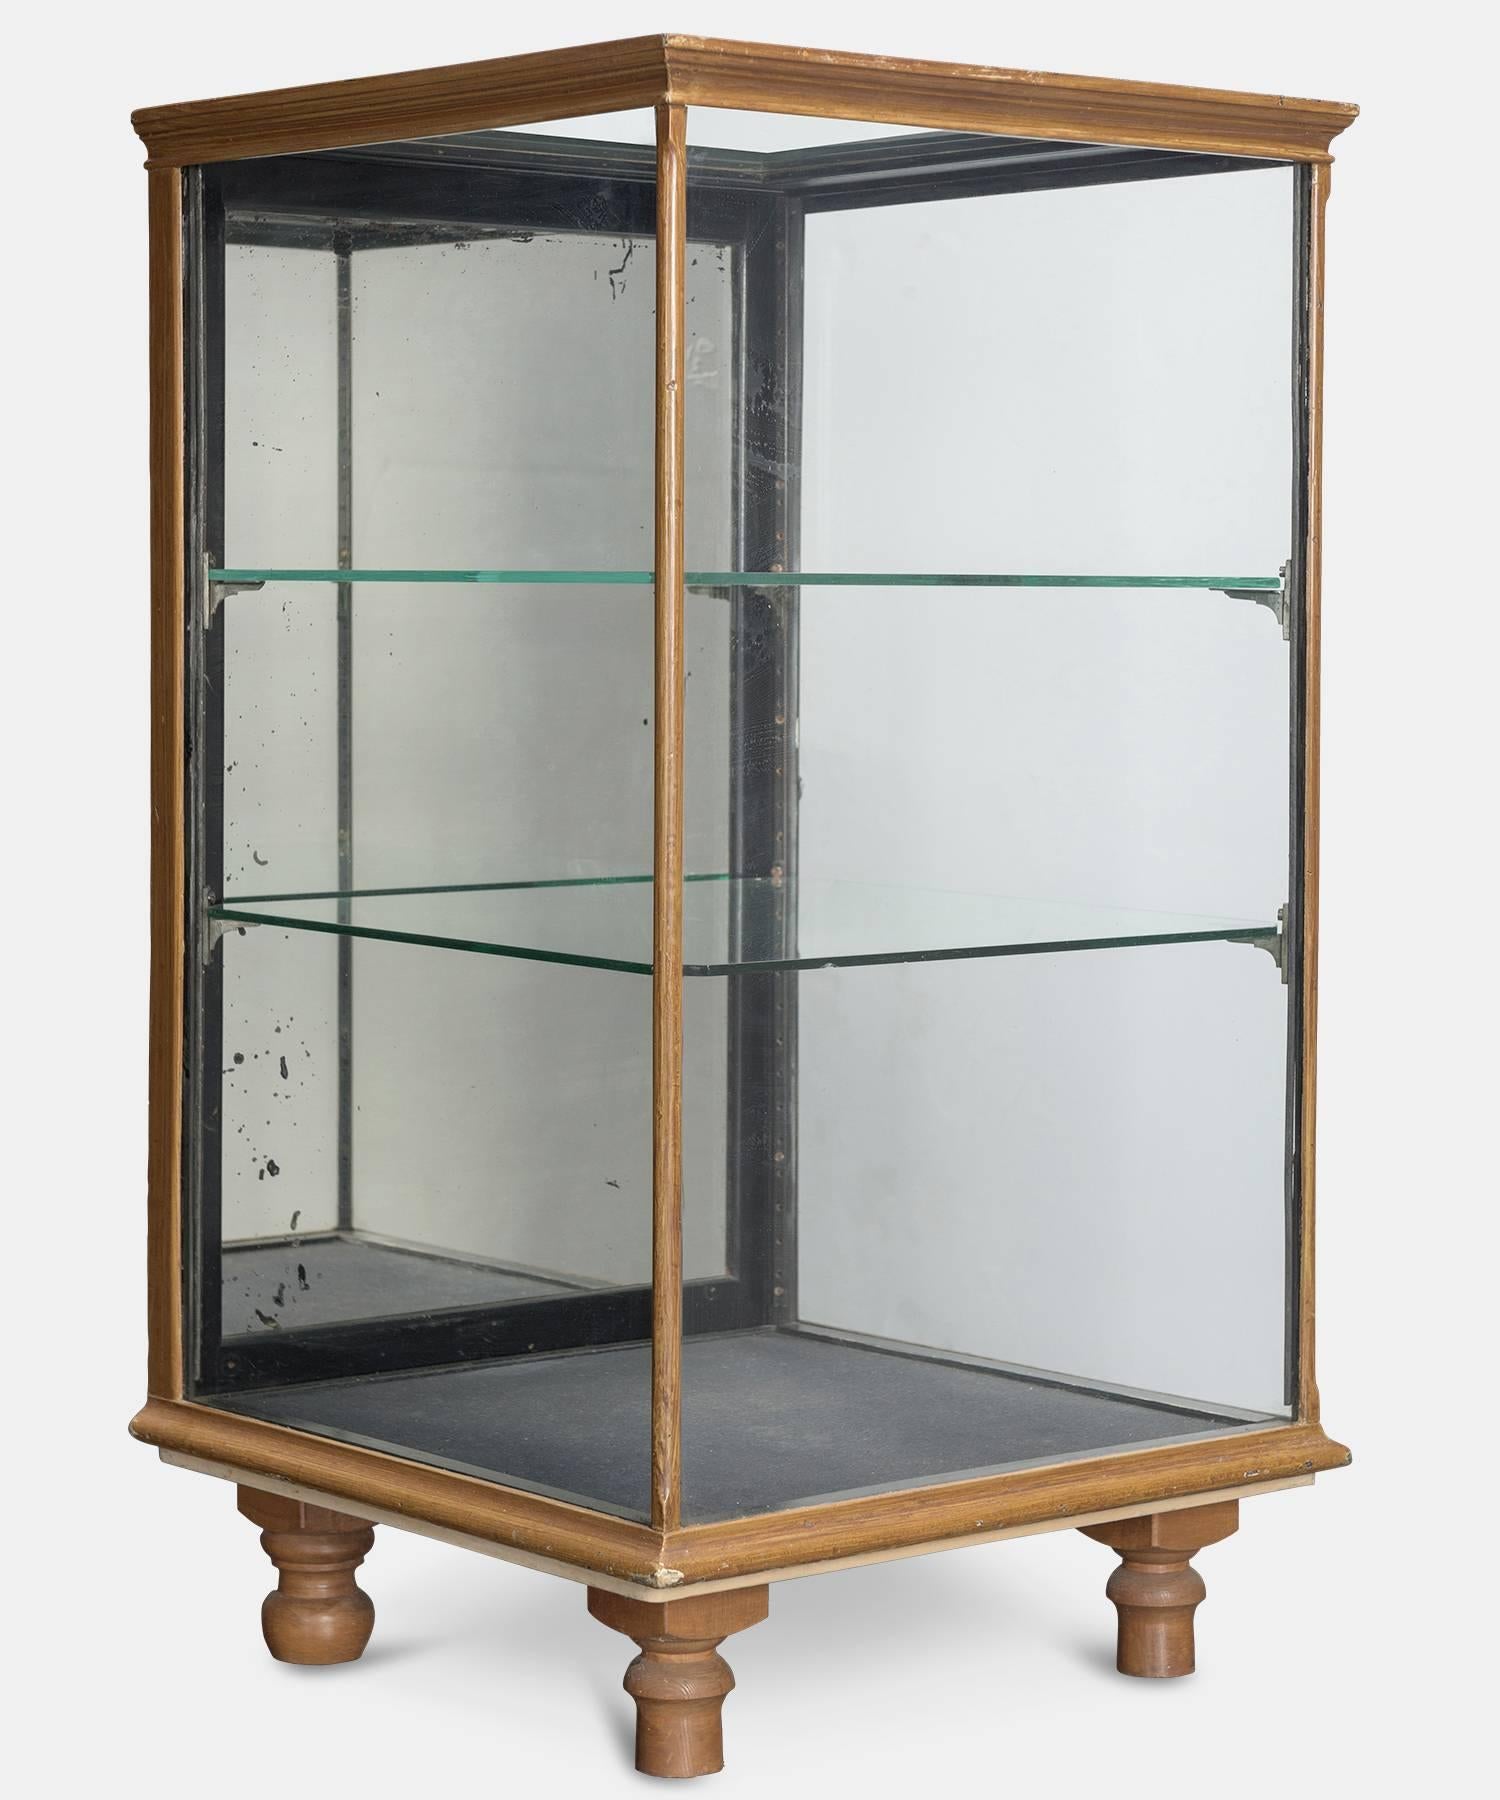 Small Mahogany Display Cabinet, England, circa 1930

Mahogany construction with original mirrored back and two glass shelves, on handsome turned legs.